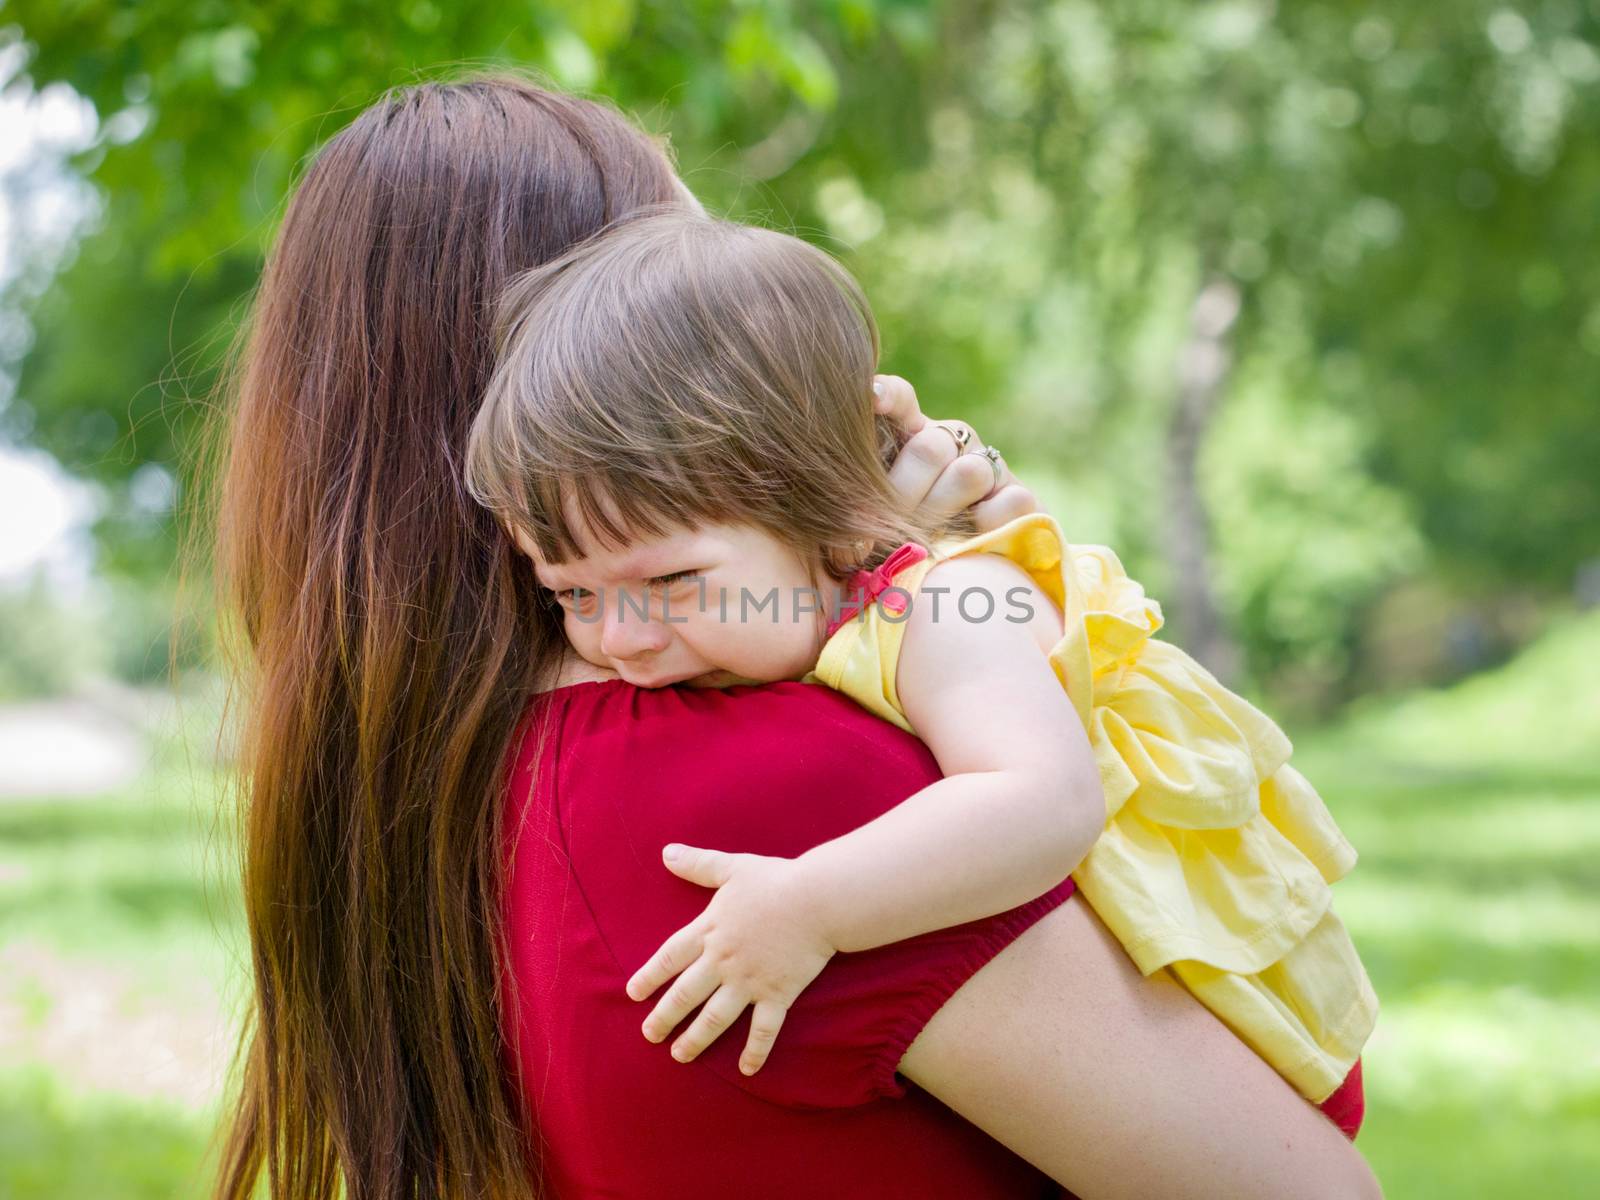 Mother holding her crying one-year old baby girl with tears close up